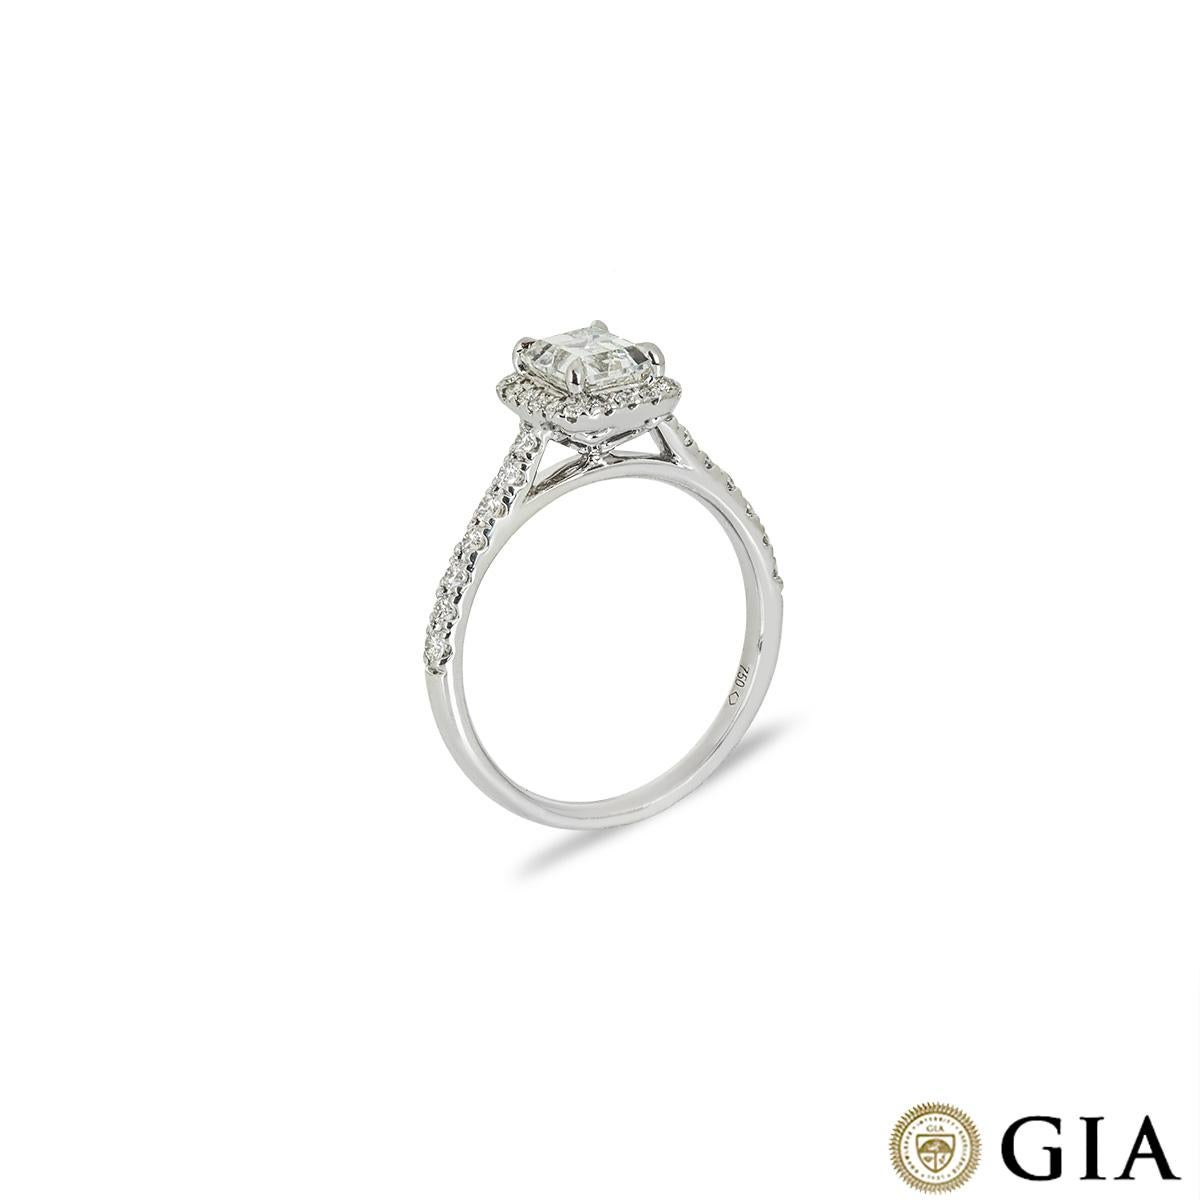 A modern 18k white gold diamond engagement ring. Set to the centre of the ring is an emerald cut diamond weighing 1.08ct, F colour and VS1 clarity. Accentuating the centre diamond are 32 round brilliant cut diamonds pave set to the halo and